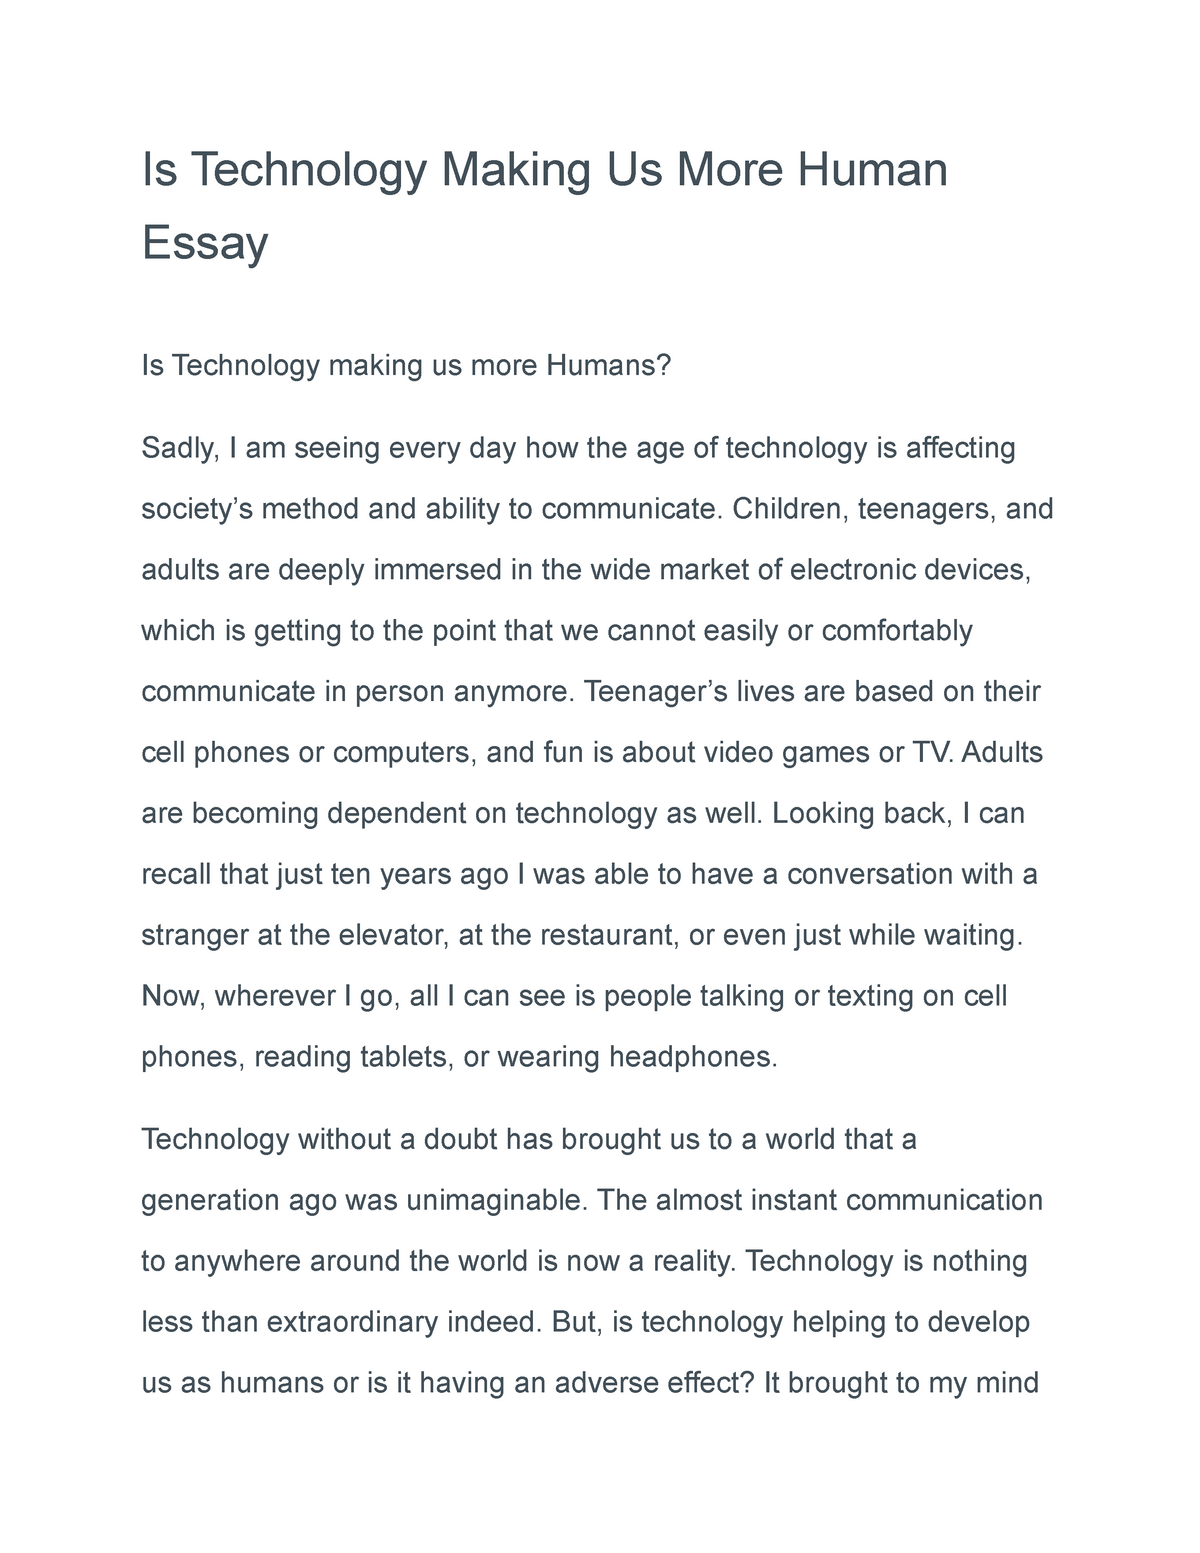 technology and human essay